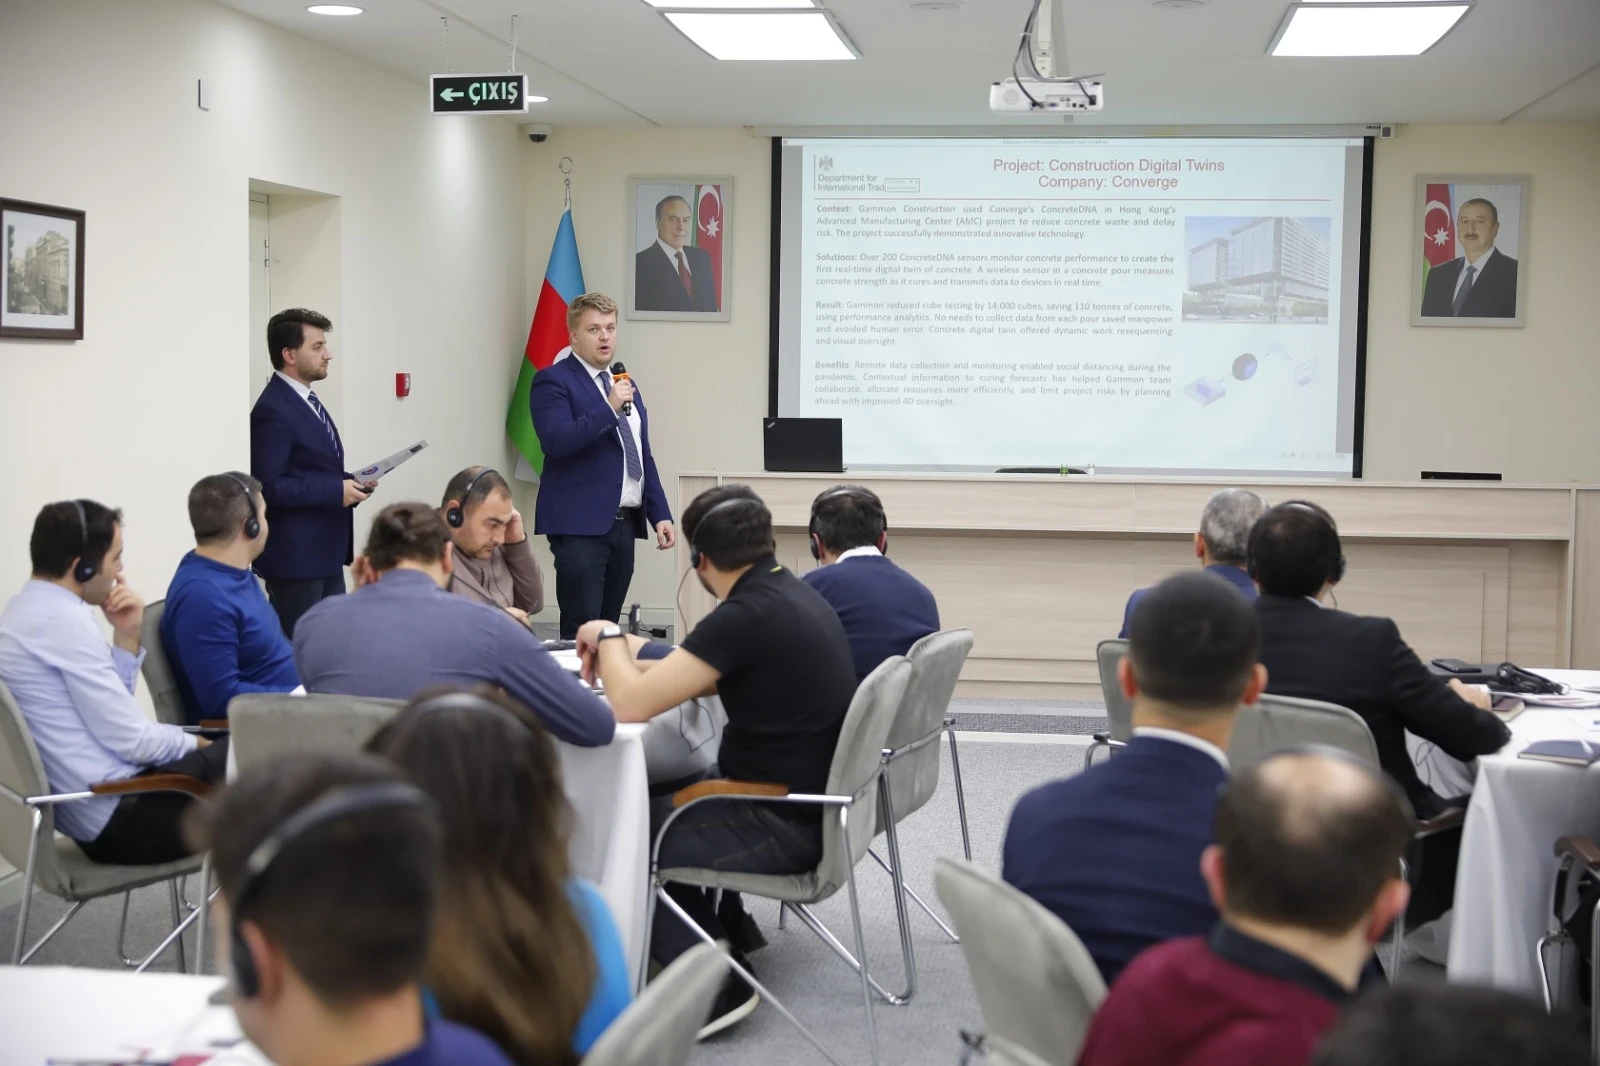 Employees of the Committee participated in the seminar on Building Information Modeling (BIM)